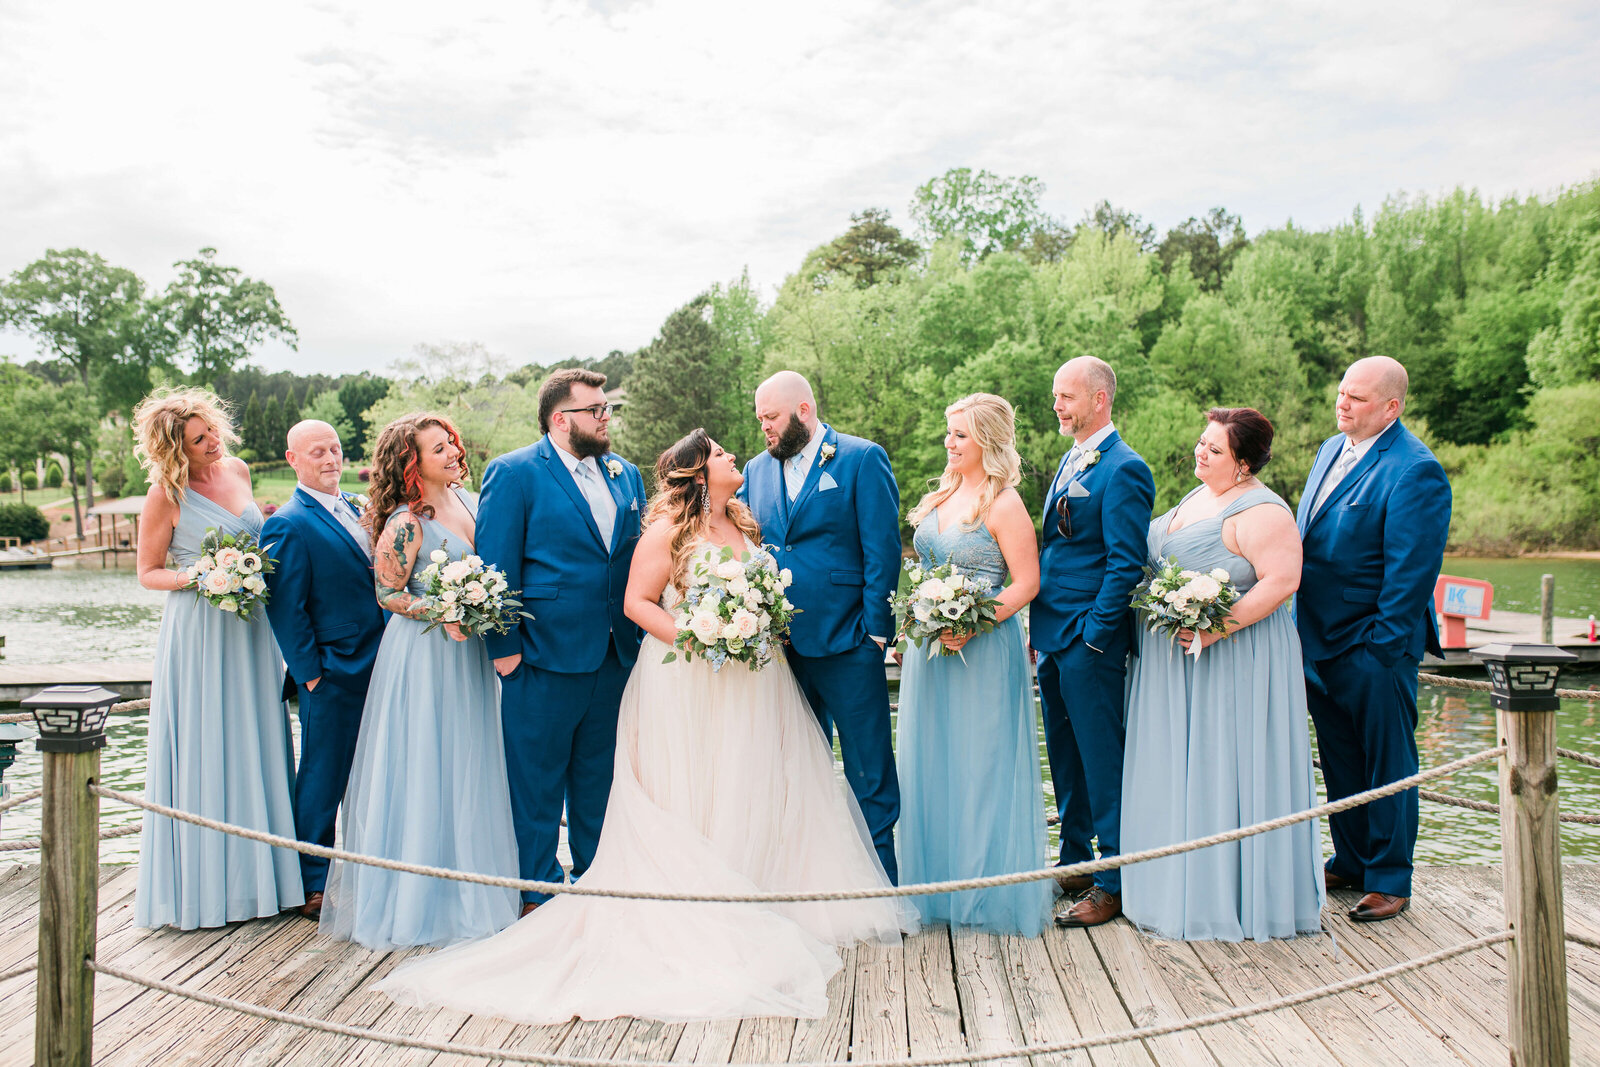 Virginia-Beach-Wedding-Planners-Sincerely-Jane-Events-7590